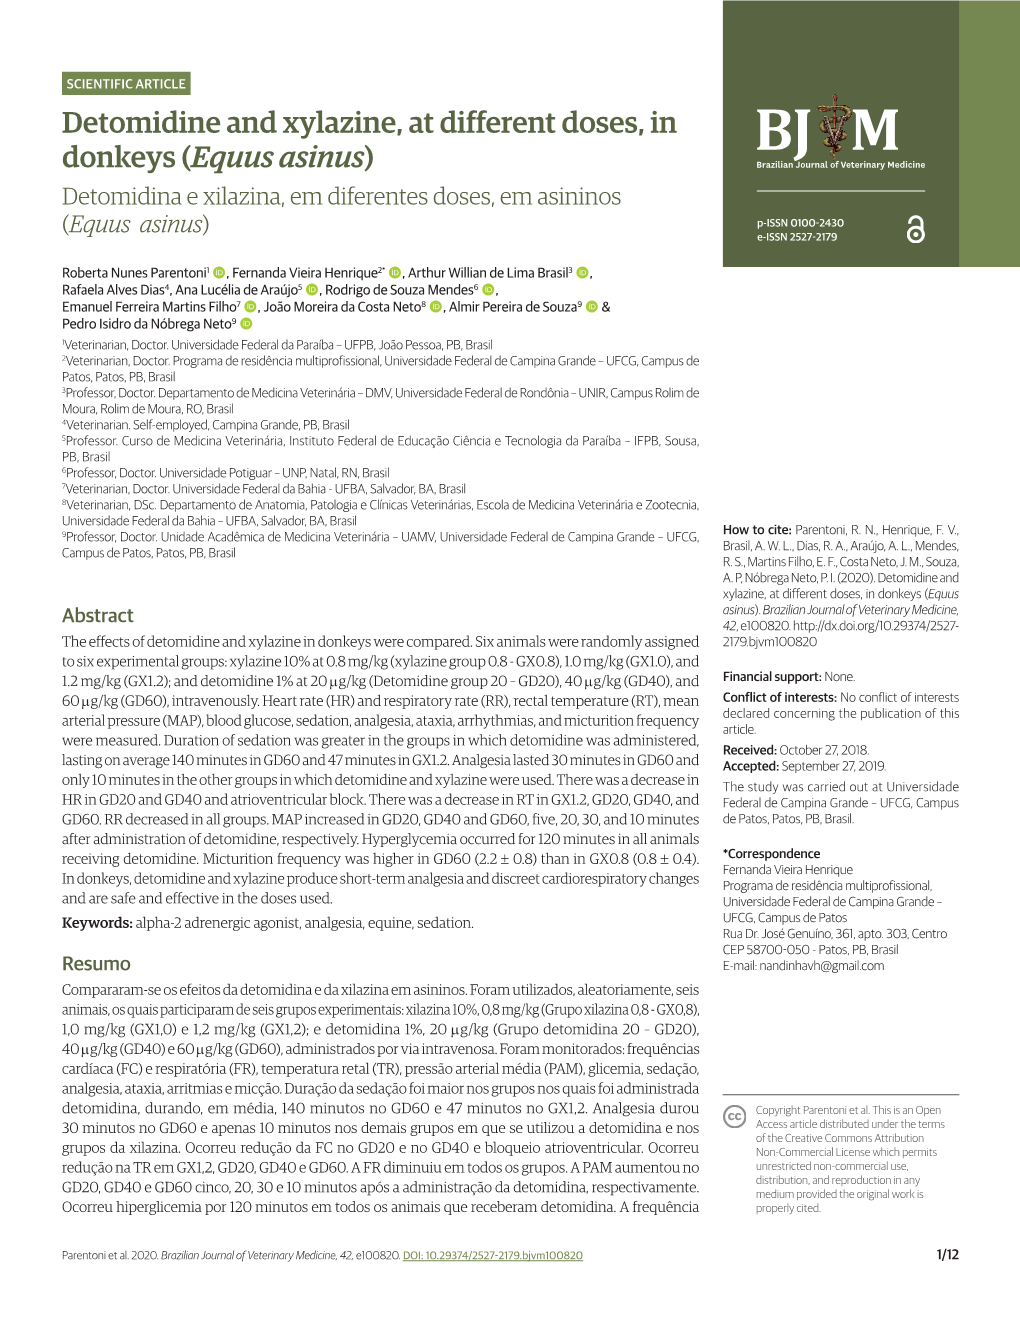 Detomidine and Xylazine, at Different Doses, in Donkeys (Equus Asinus)